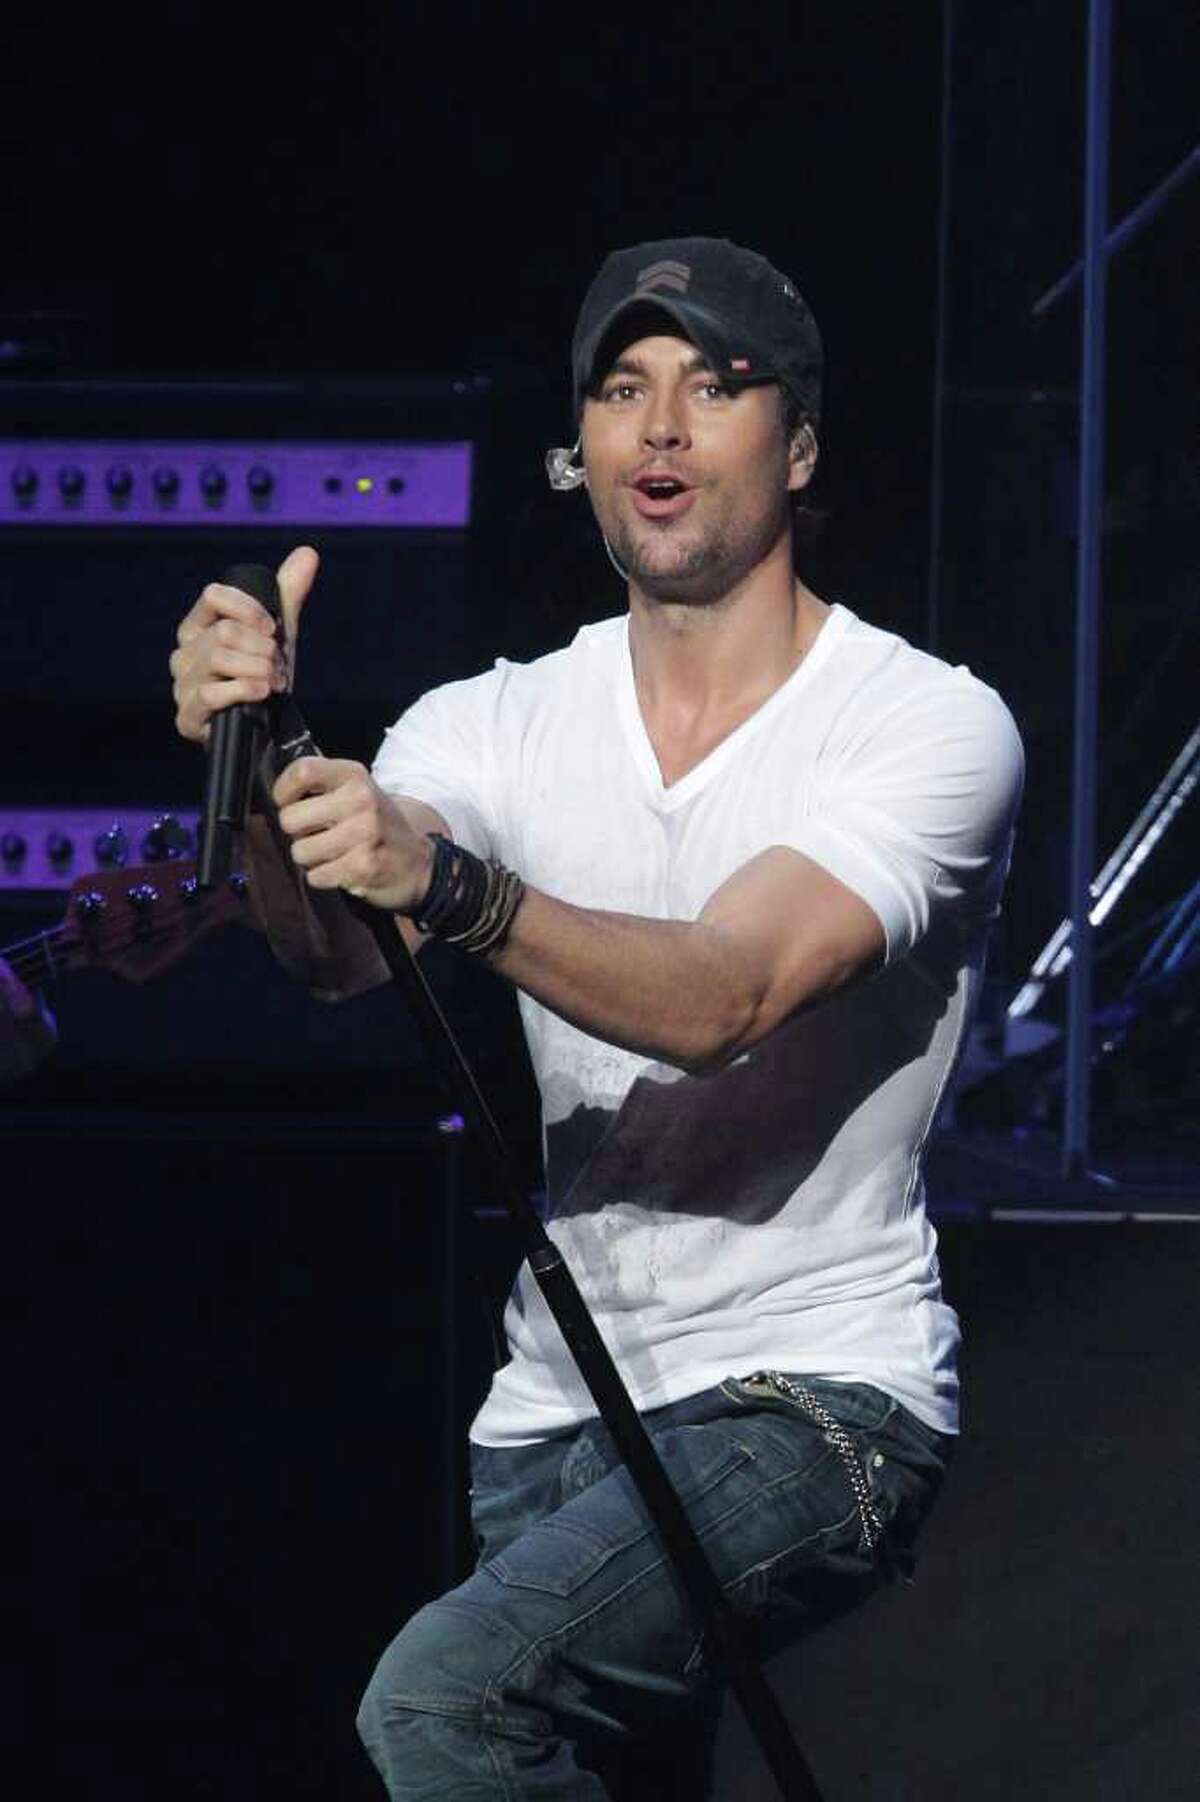 LOS ANGELES, CA - DECEMBER 05: Enrique Iglesias performs at the KIIS FM's Jingle Ball 2010 on December 5, 2010 in Los Angeles, California. (Photo by Noel Vasquez/Getty Images) *** Local Caption *** Enrique Iglesias